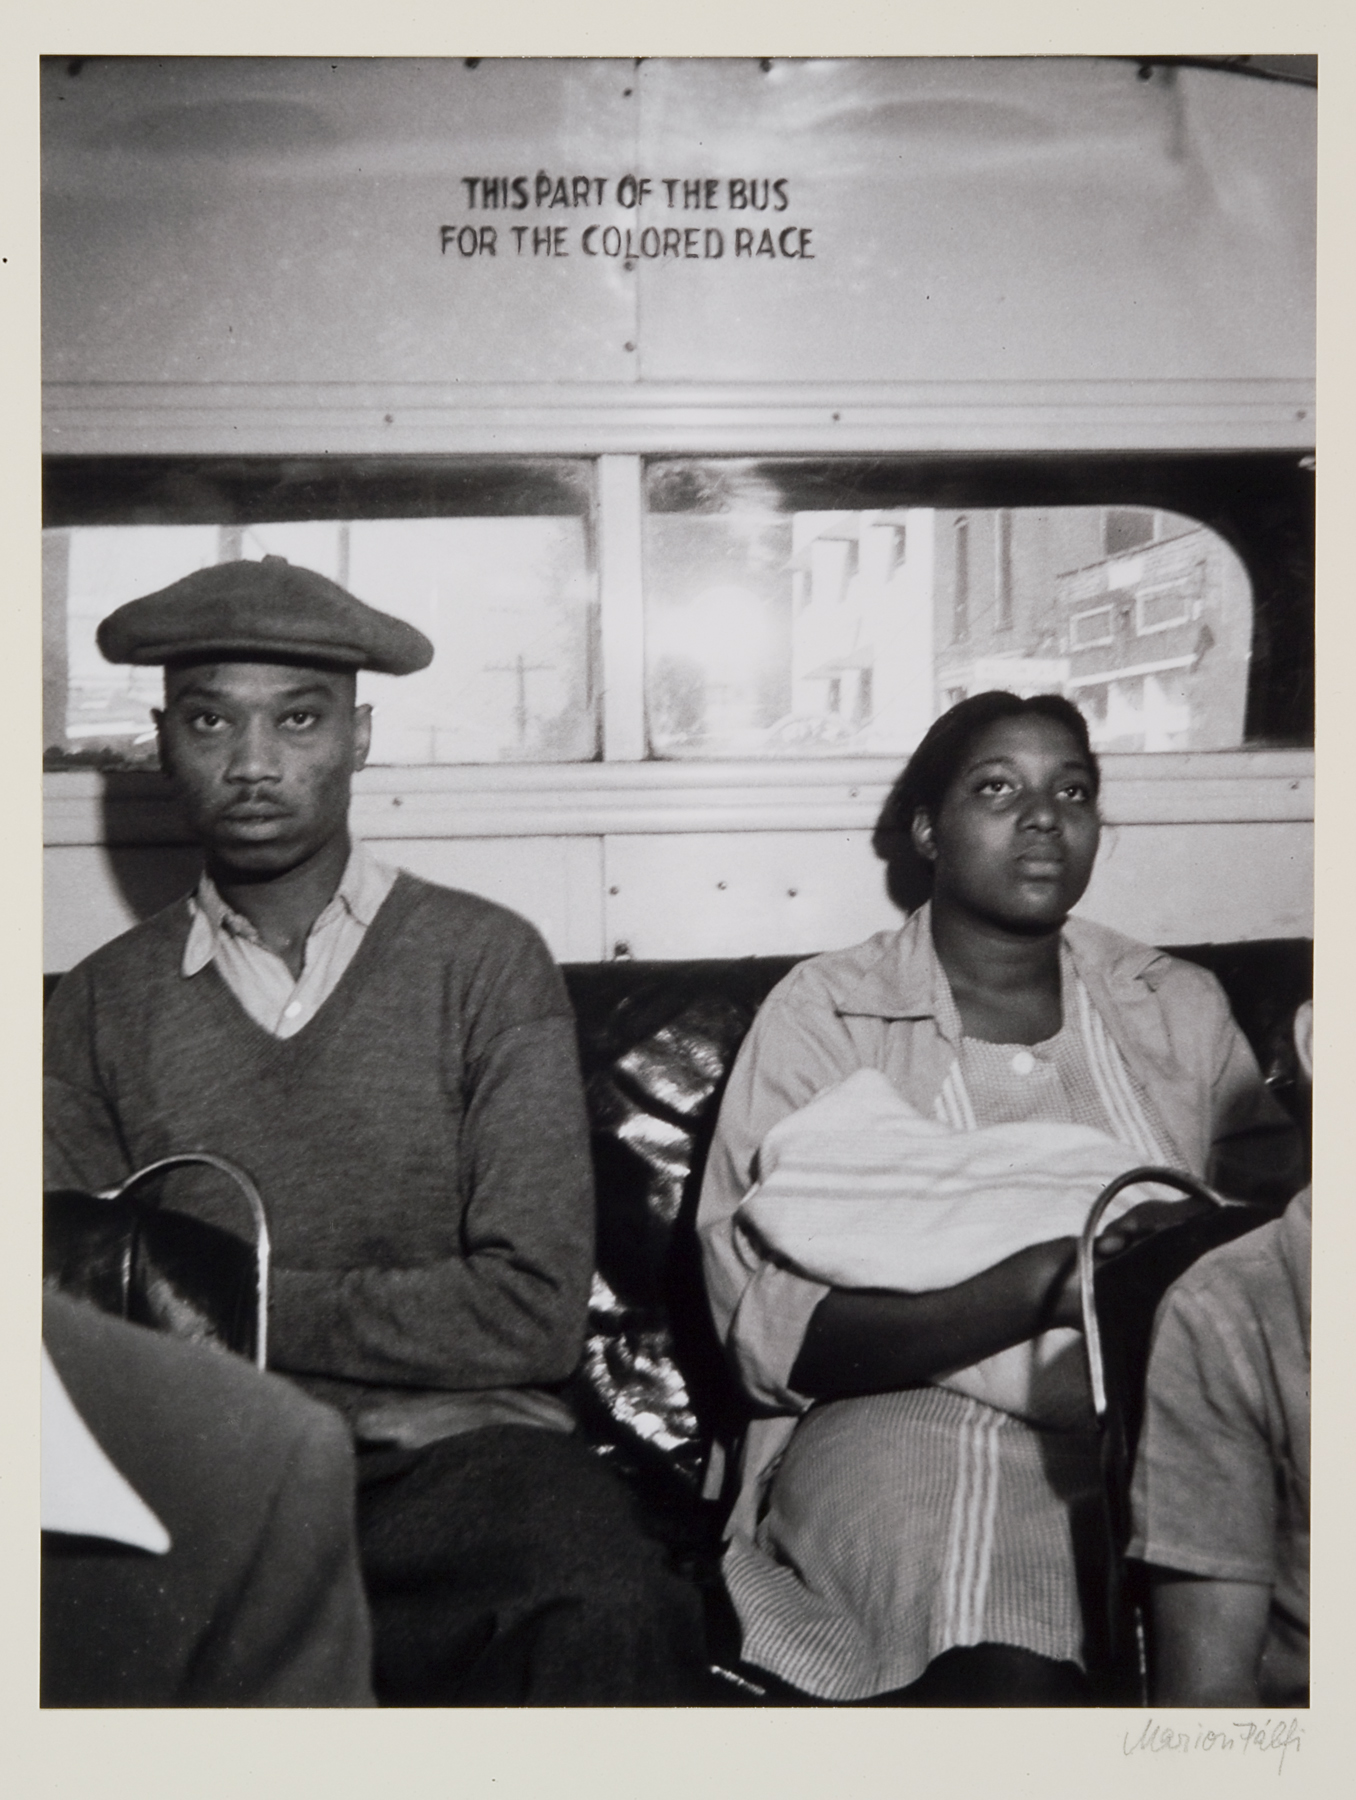 Black-and-white image of an African-American male and female seated on a city bus. Above their heads is printed, “THIS PART OF THE BUS // FOR THE COLORED RACE.”